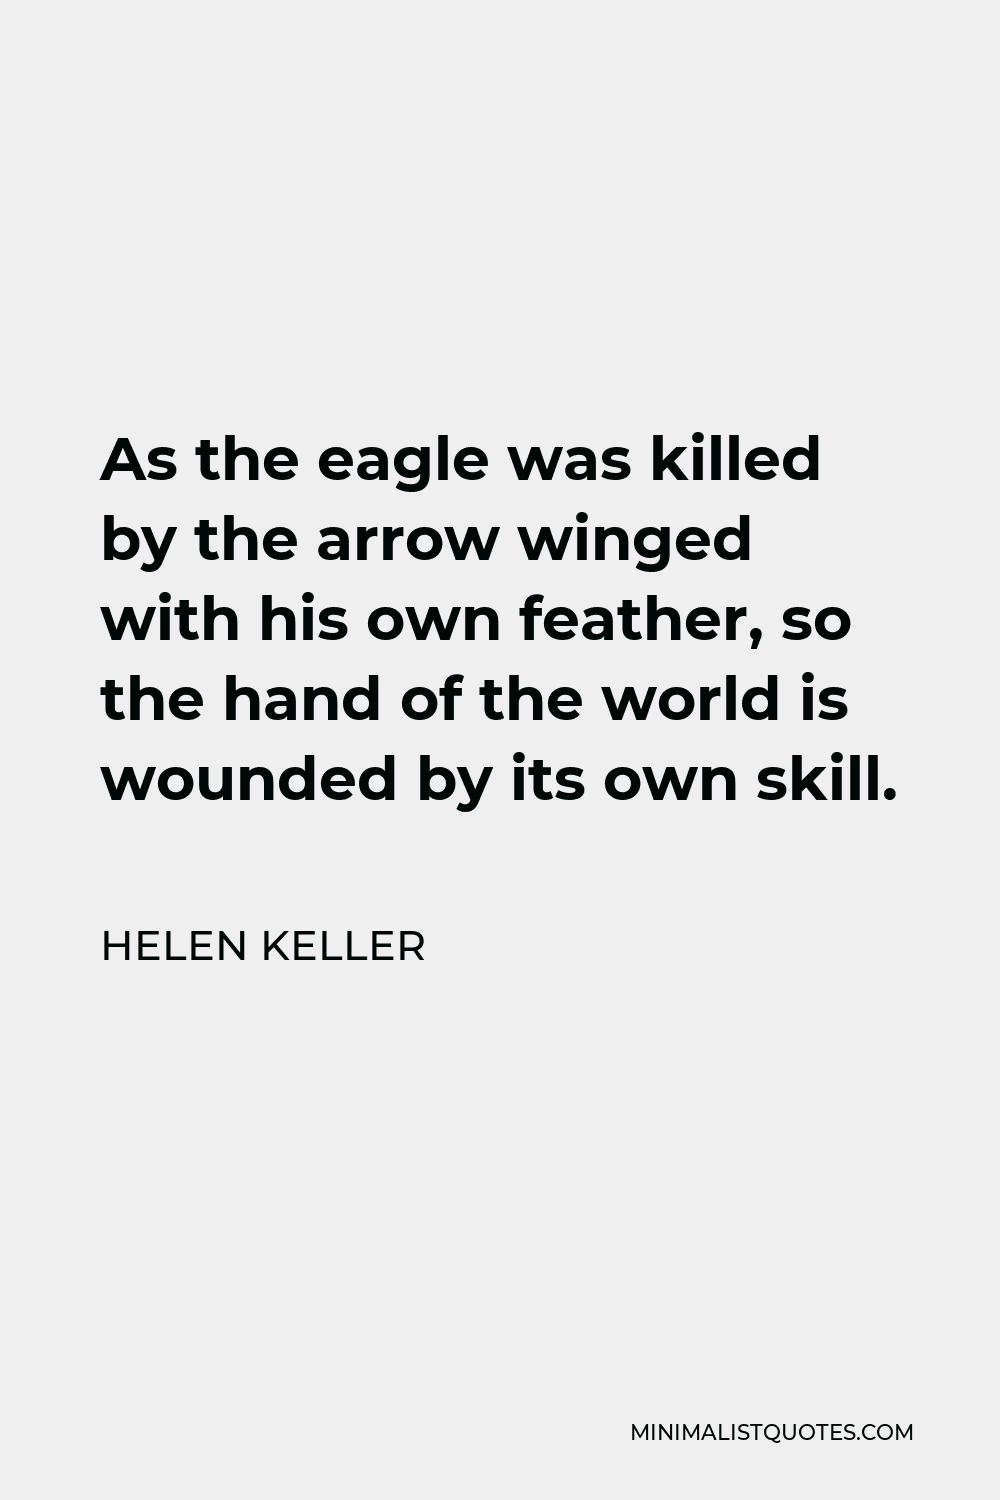 Helen Keller Quote - As the eagle was killed by the arrow winged with his own feather, so the hand of the world is wounded by its own skill.